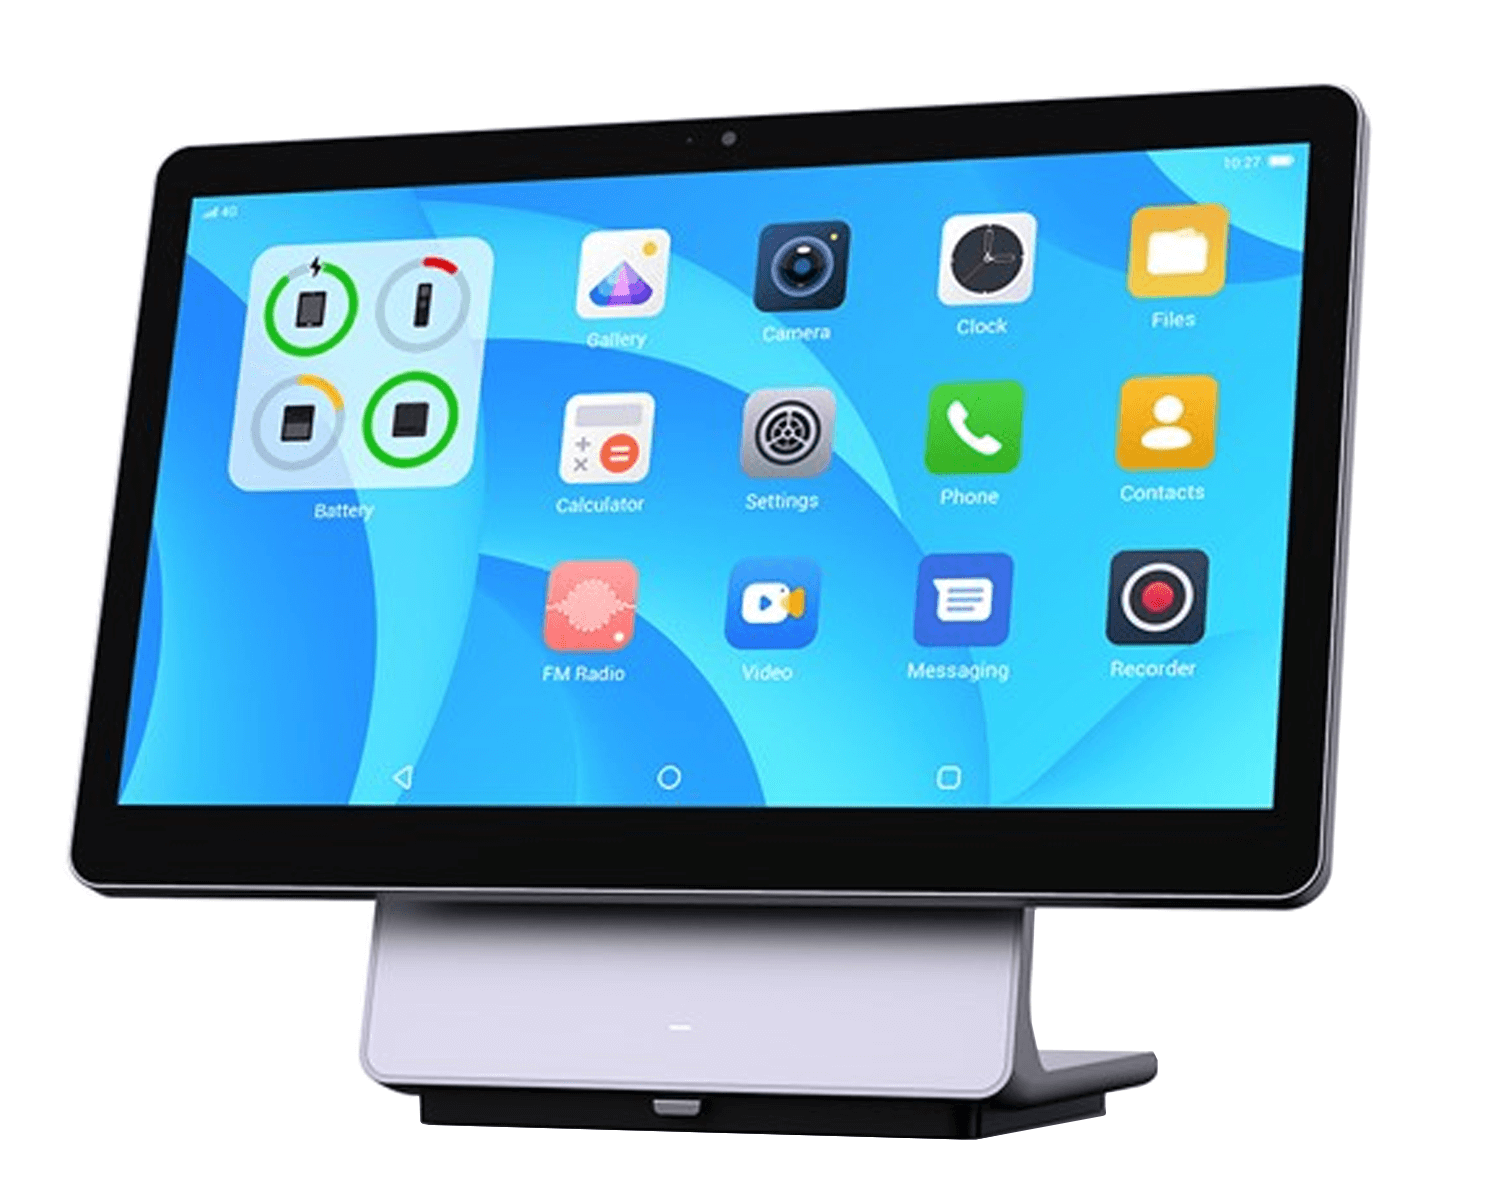 The front of the Elys Workstation featuring the home screen with various apps and a blue background.